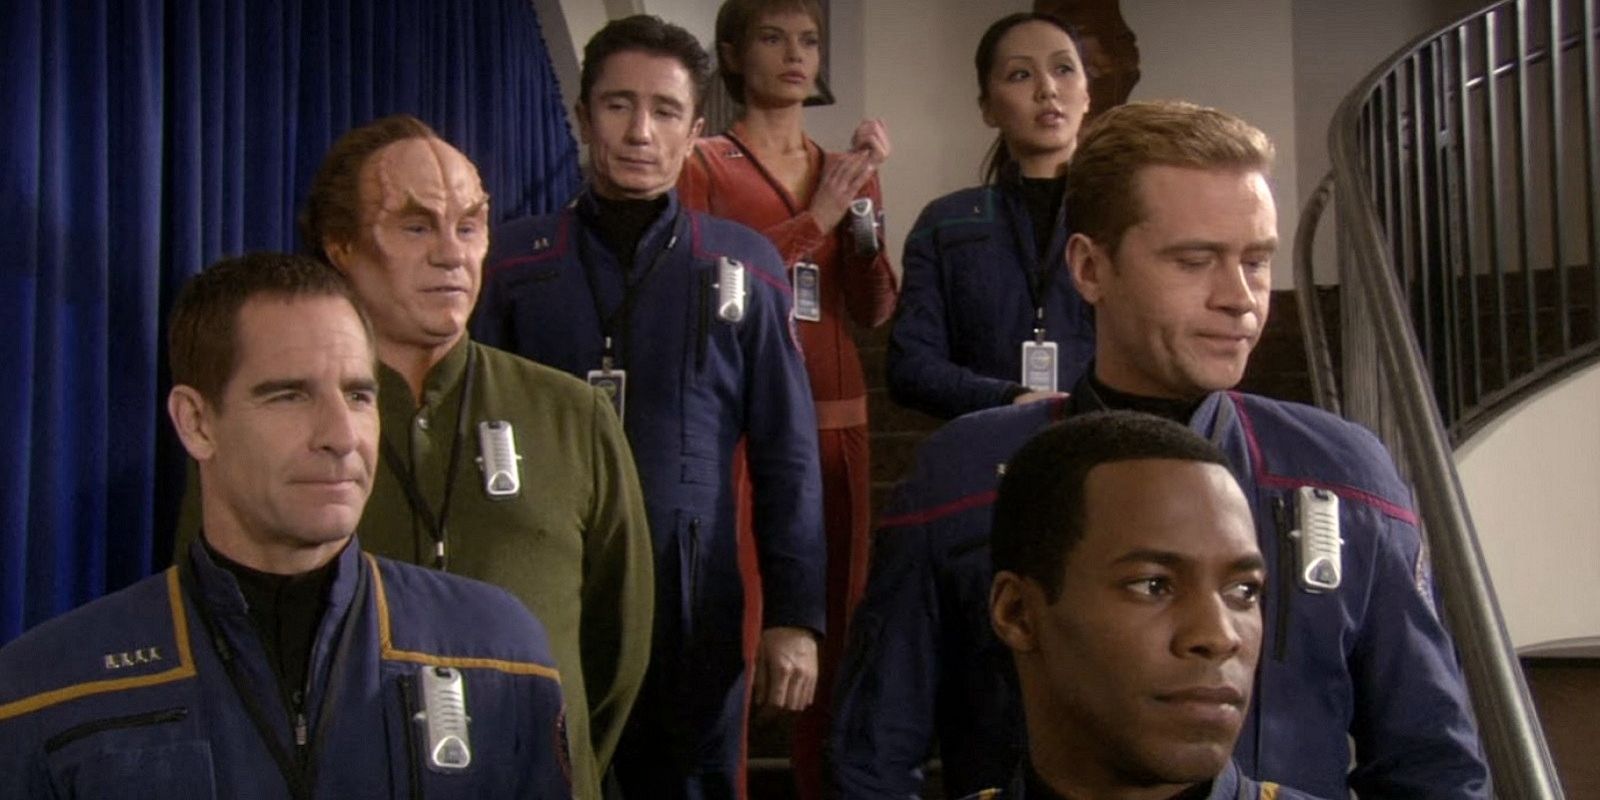 Star Trek Enterprise cast standing as a group on a staircase in Season 3